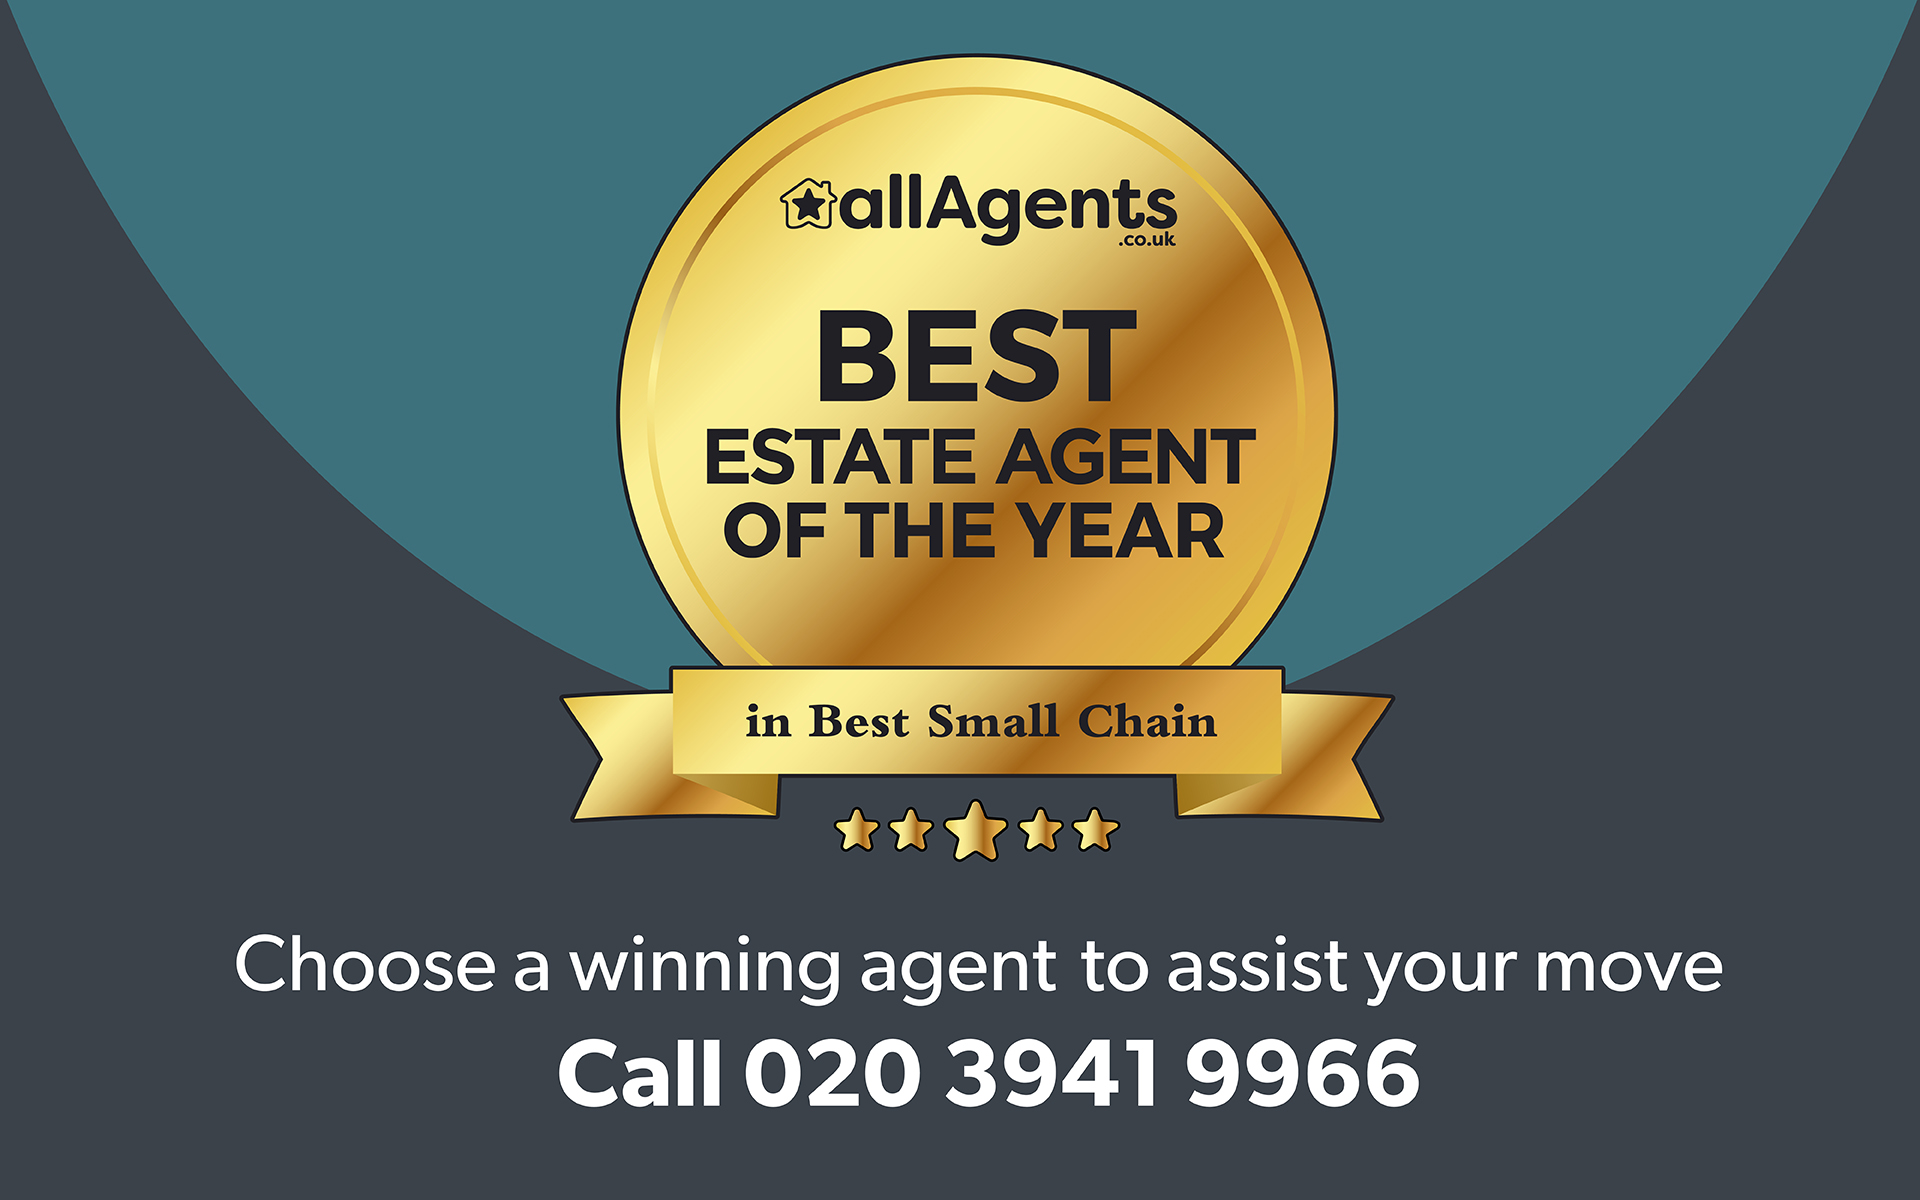 allAgents Award to Alex Neil for Best Estate Agents of the year